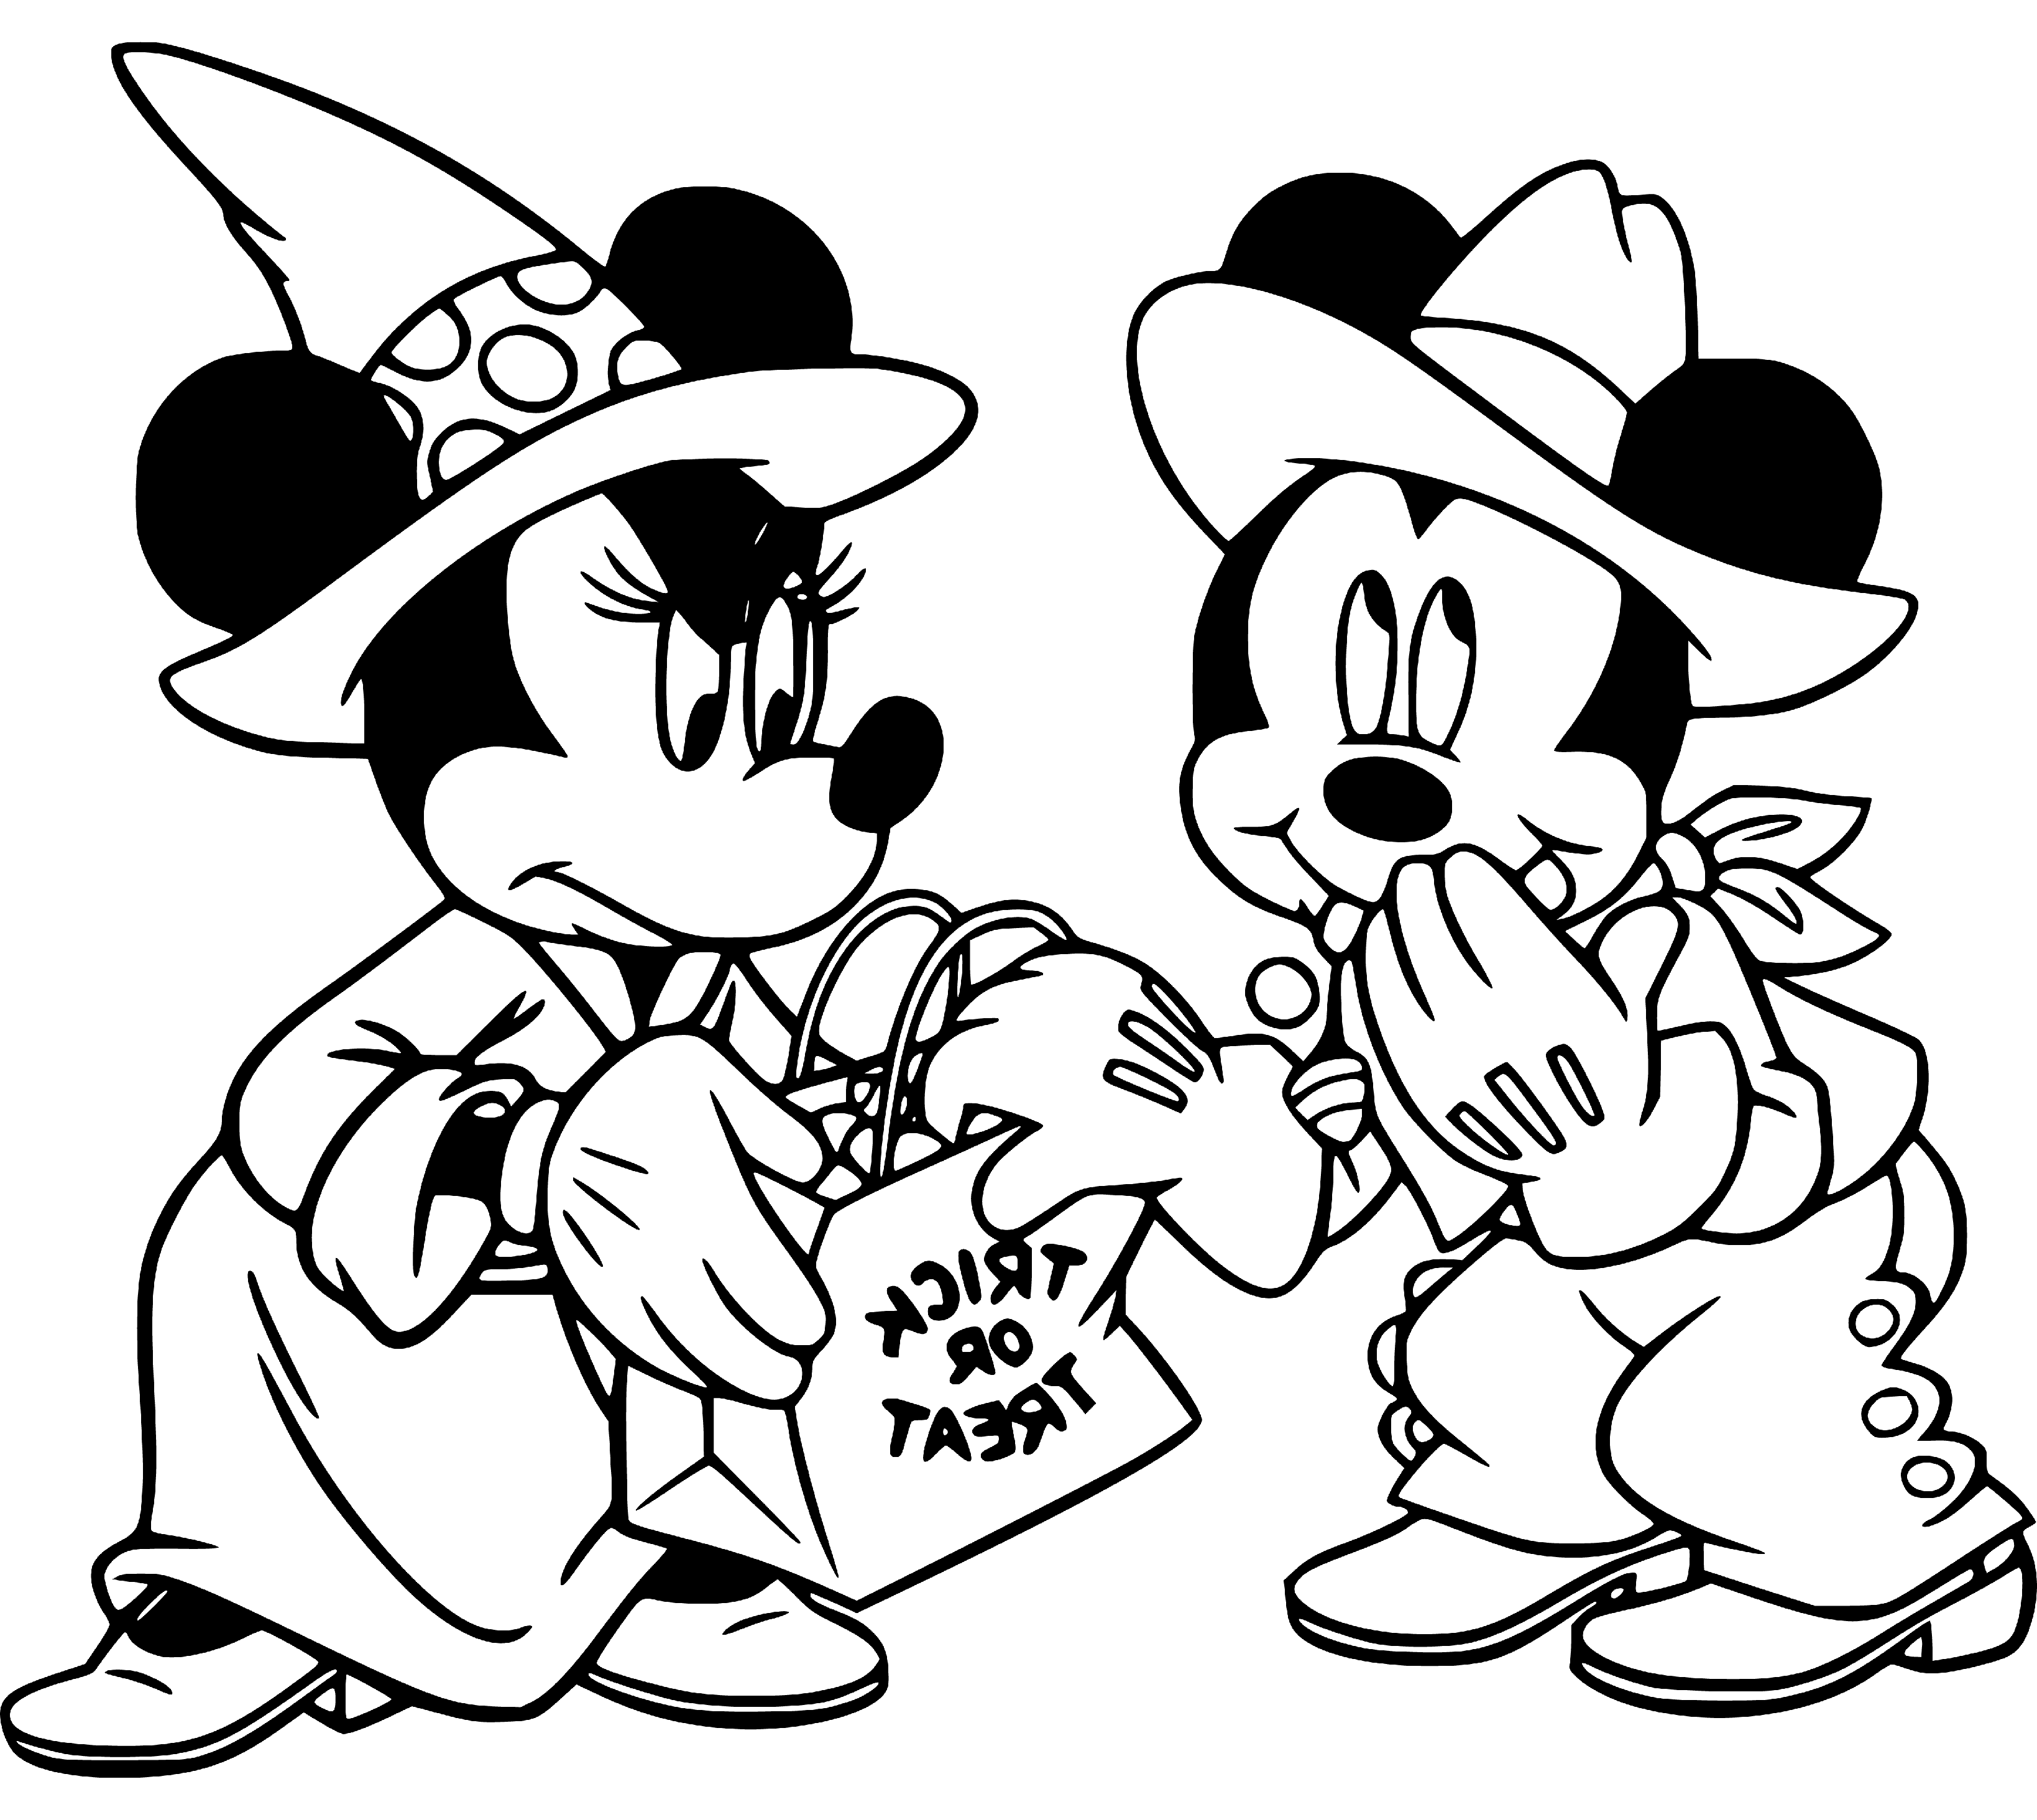 Printable Minnie Mouse and Mickey Mouse Halloween Coloring Page for kids.